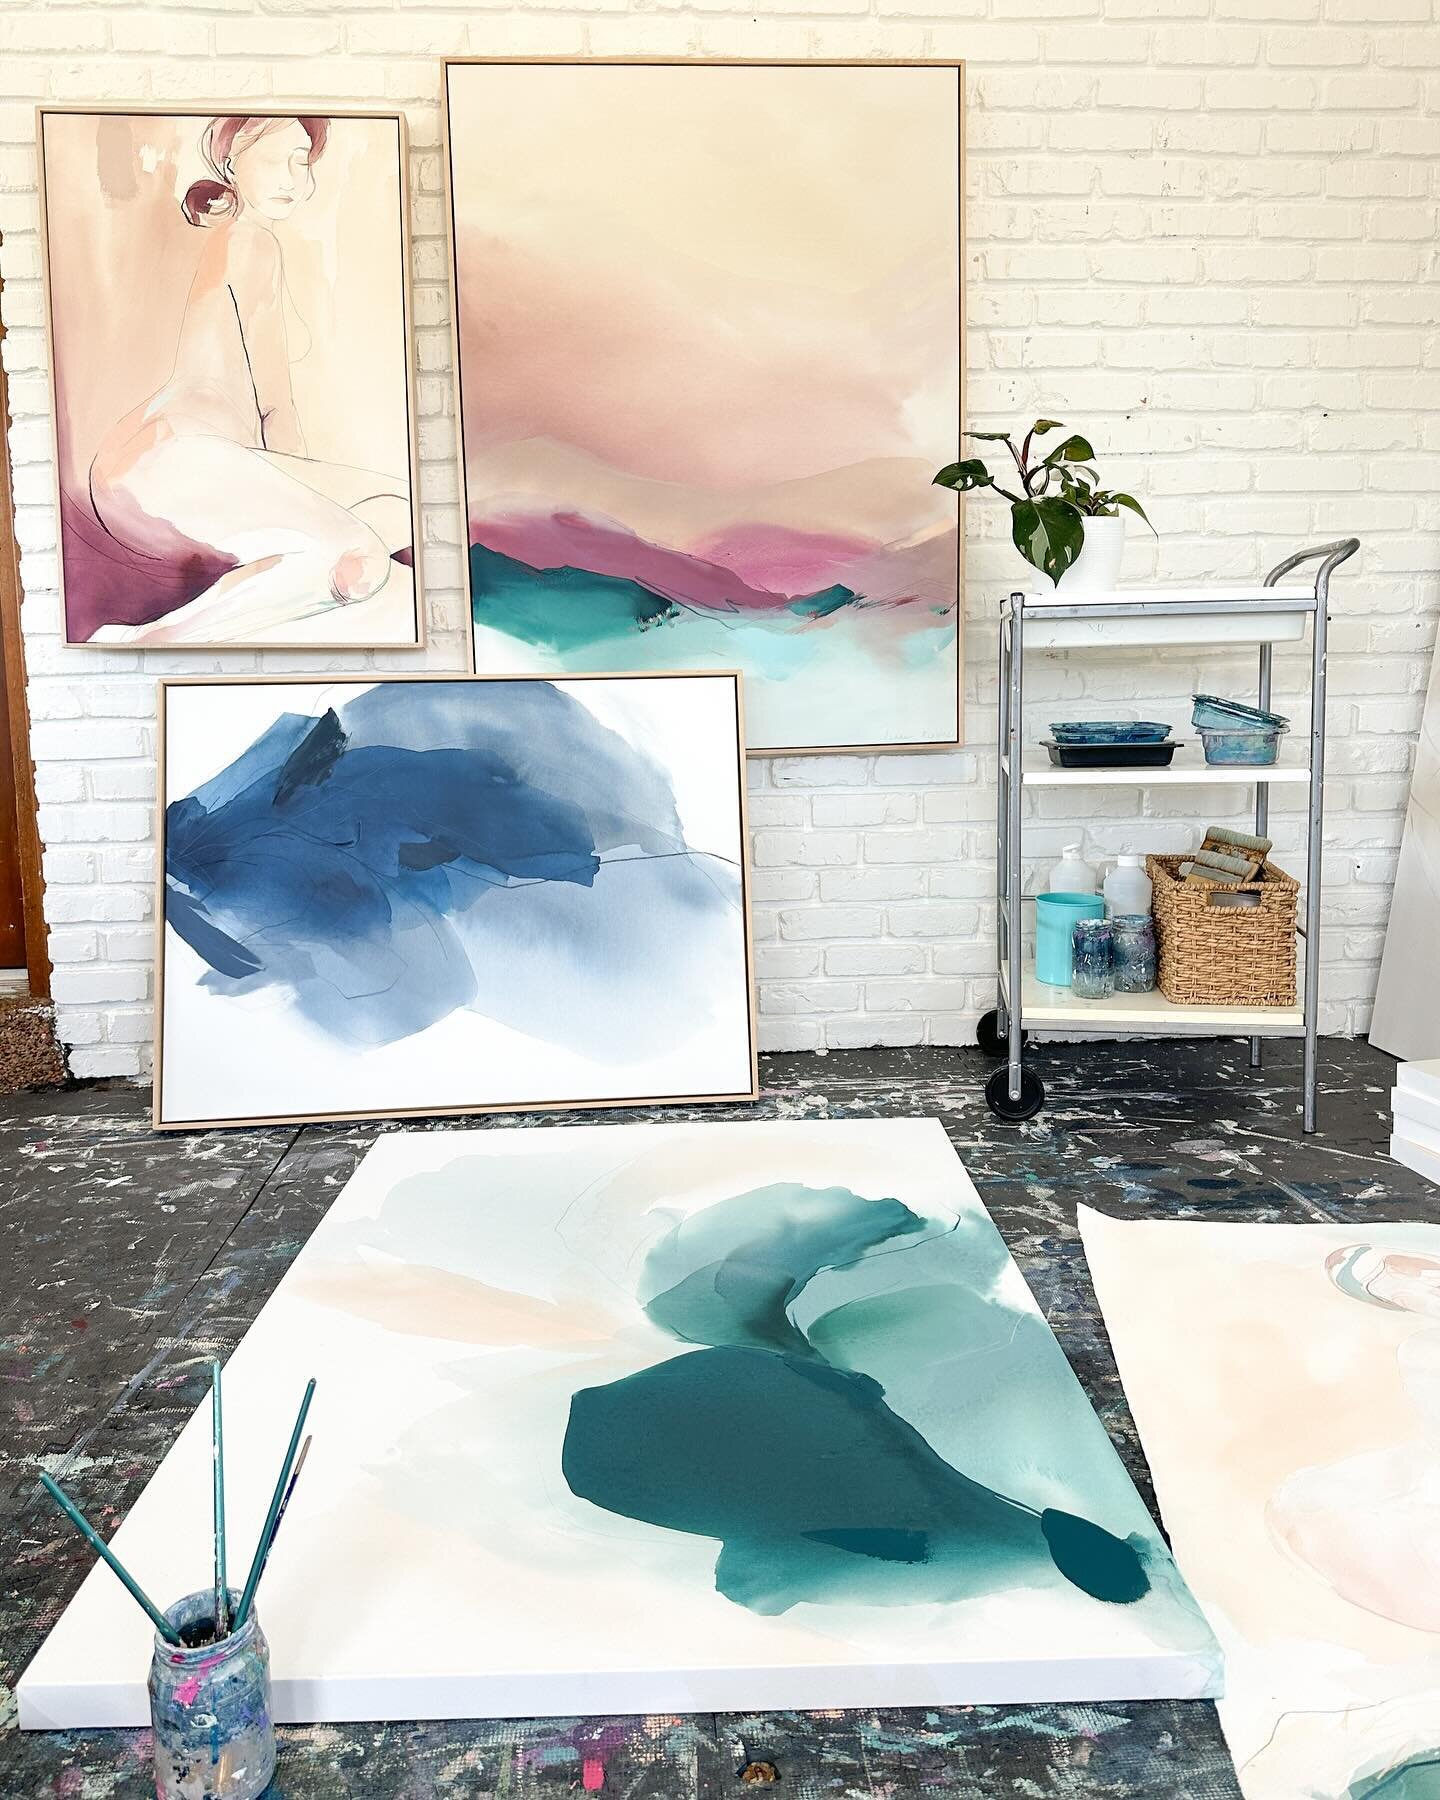 Getting ready for @theotherartfair Chicago this weekend April 11-14! I&rsquo;m so thrilled to be a part of this show for the first time. I&rsquo;m bringing abstracts and a couple of brand new figures and abstract landscapes. 

Chicago friends, I have